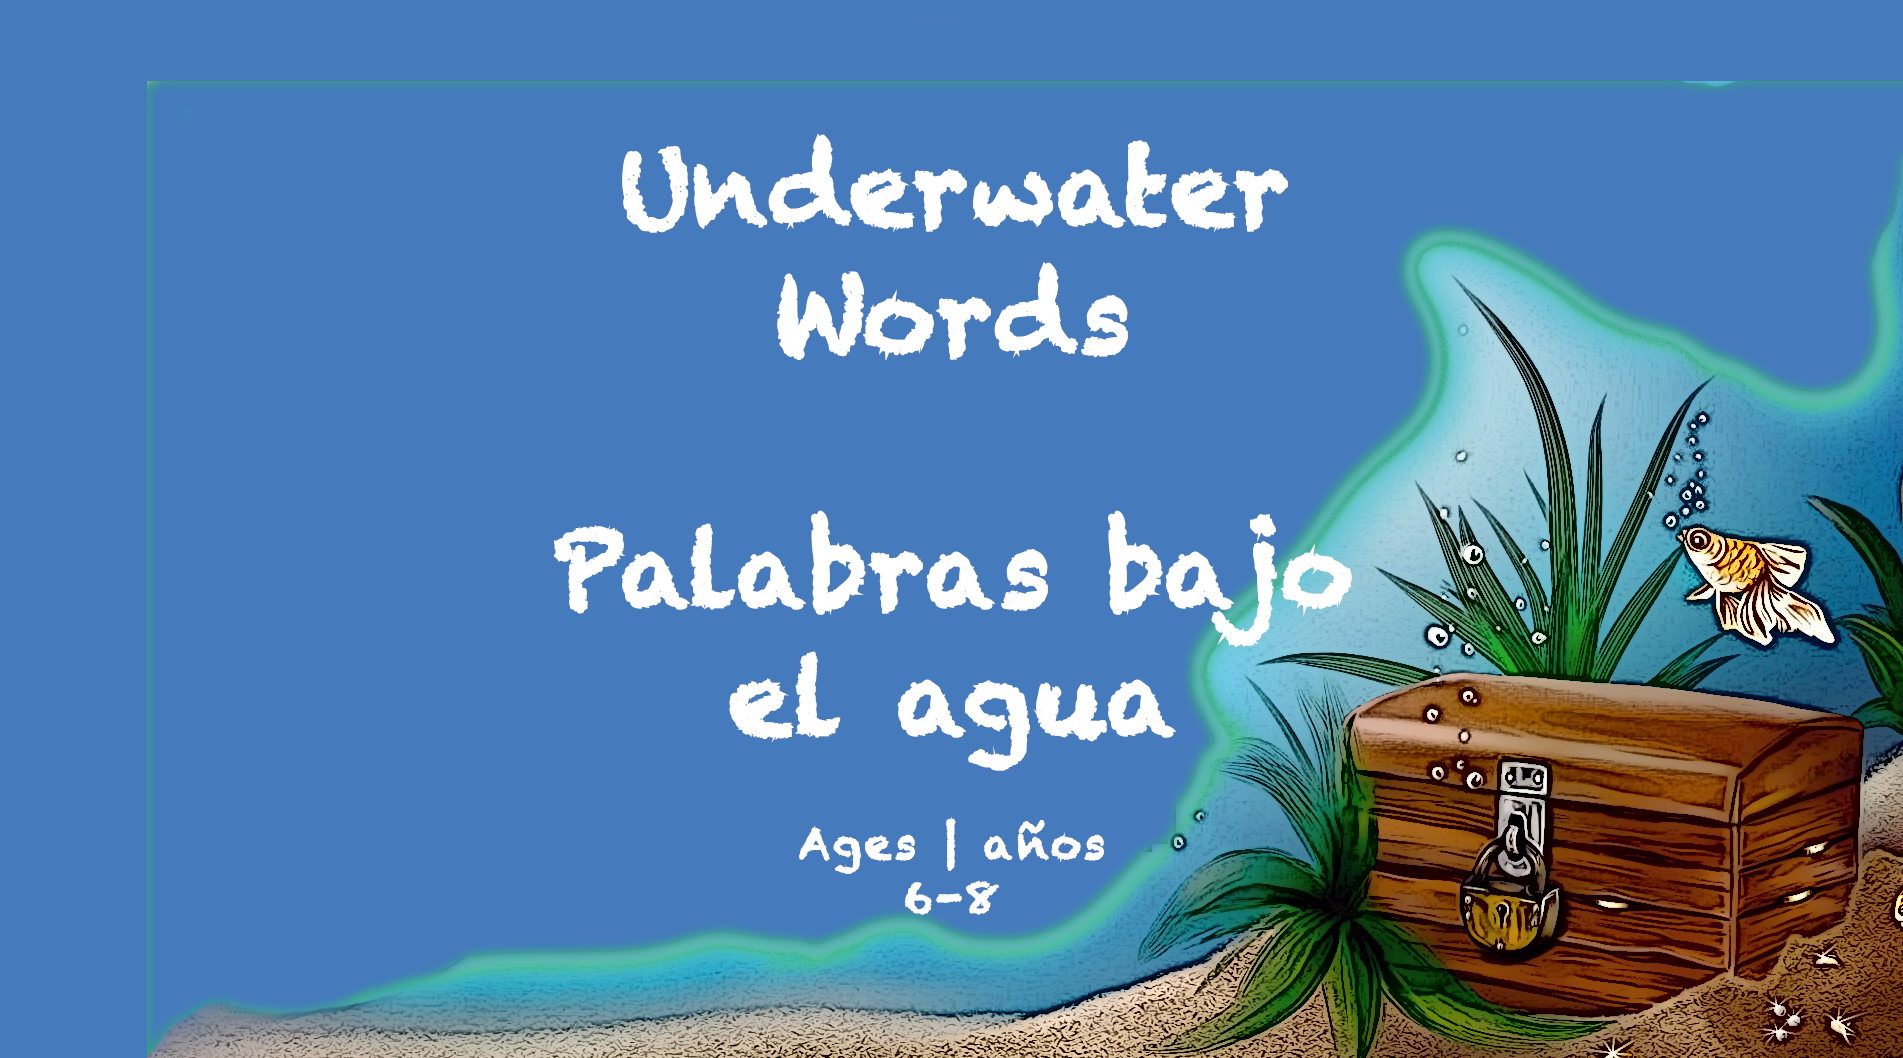 Weekly Themes BookSpring at-home learning Underwater Word ages 6-8